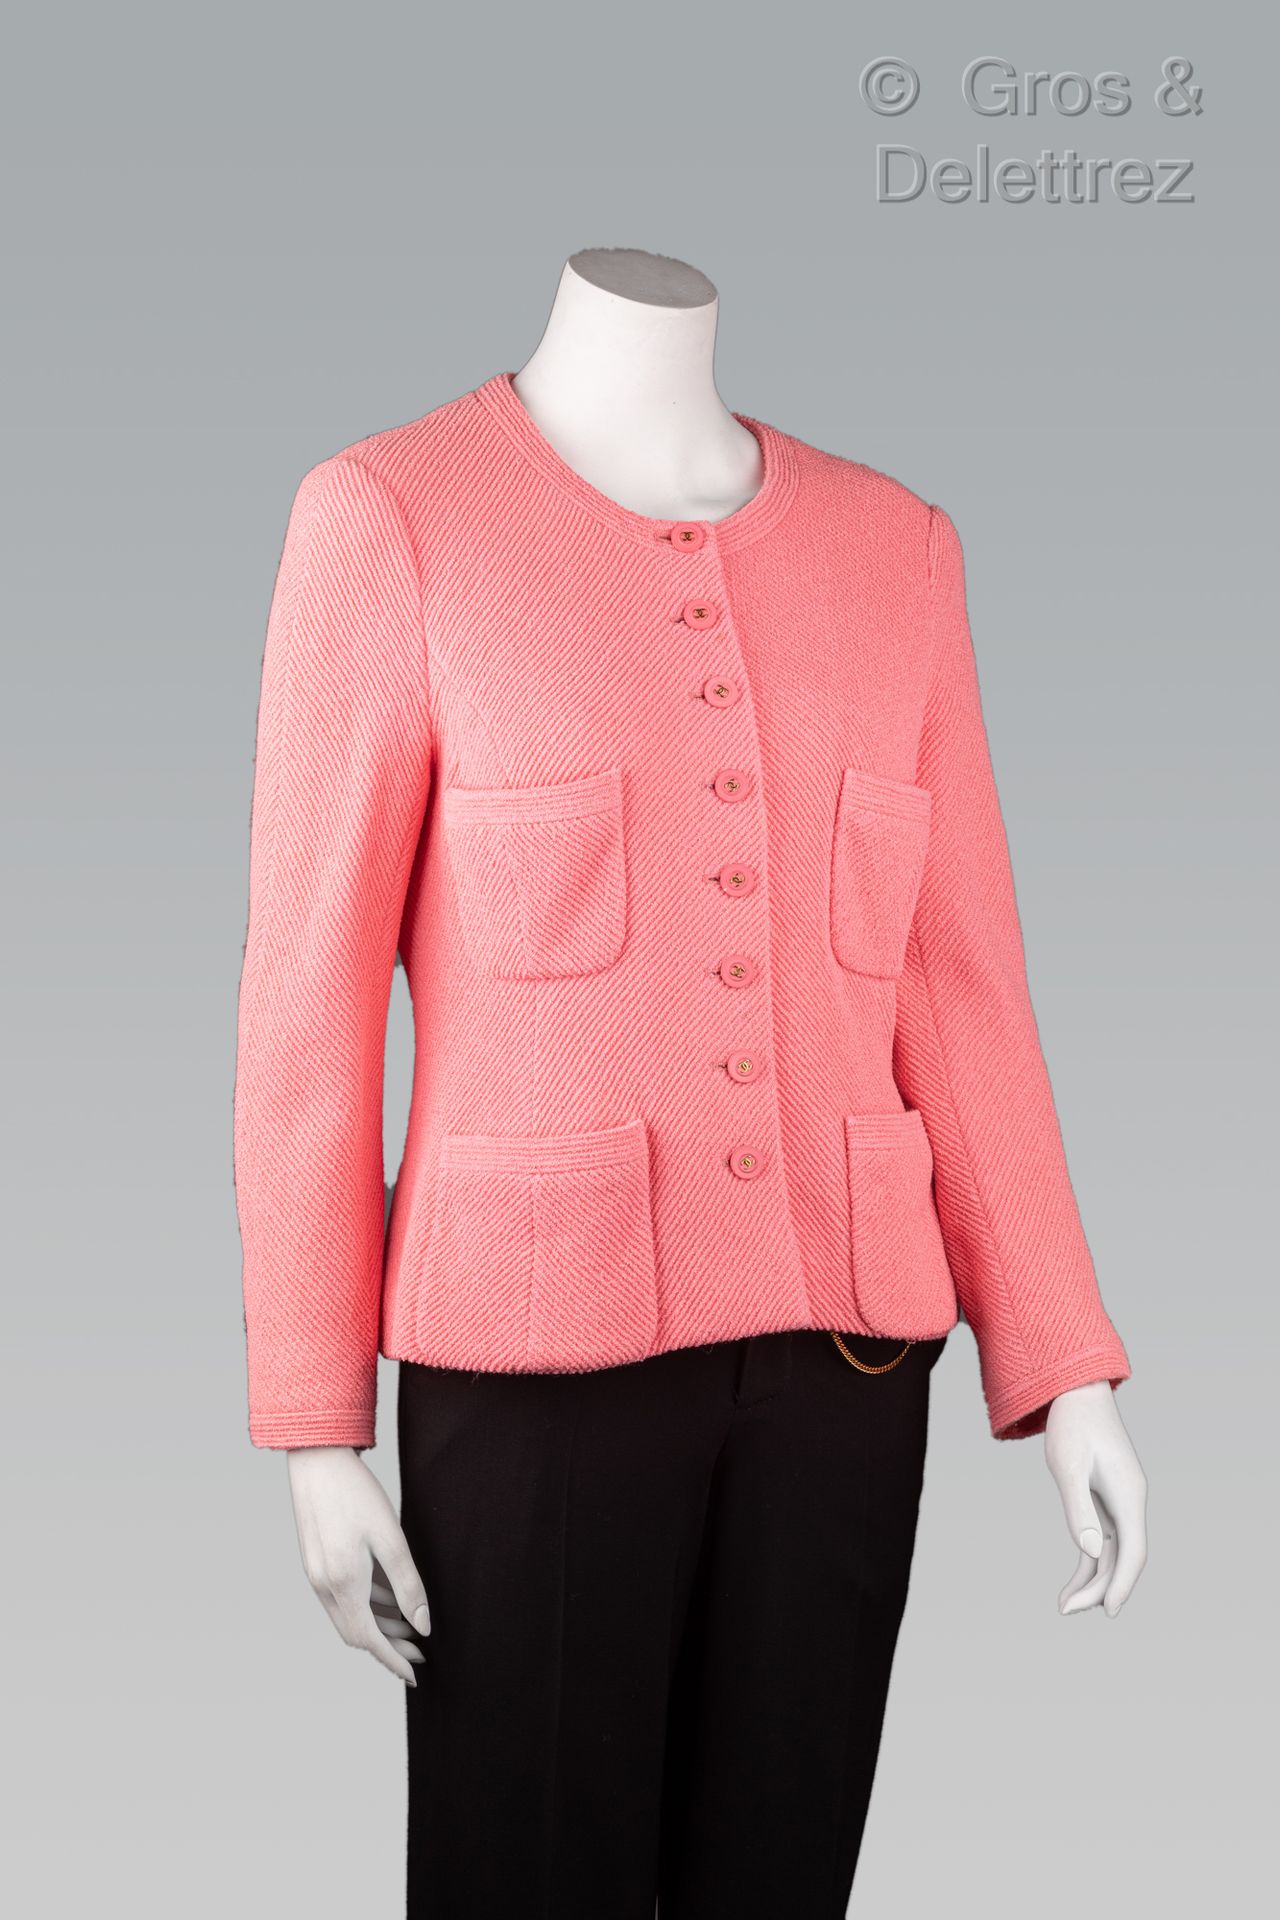 Null CHANEL Boutique by Karl Lagerfeld

1995 Cruise Collection

Jacket in pink m&hellip;